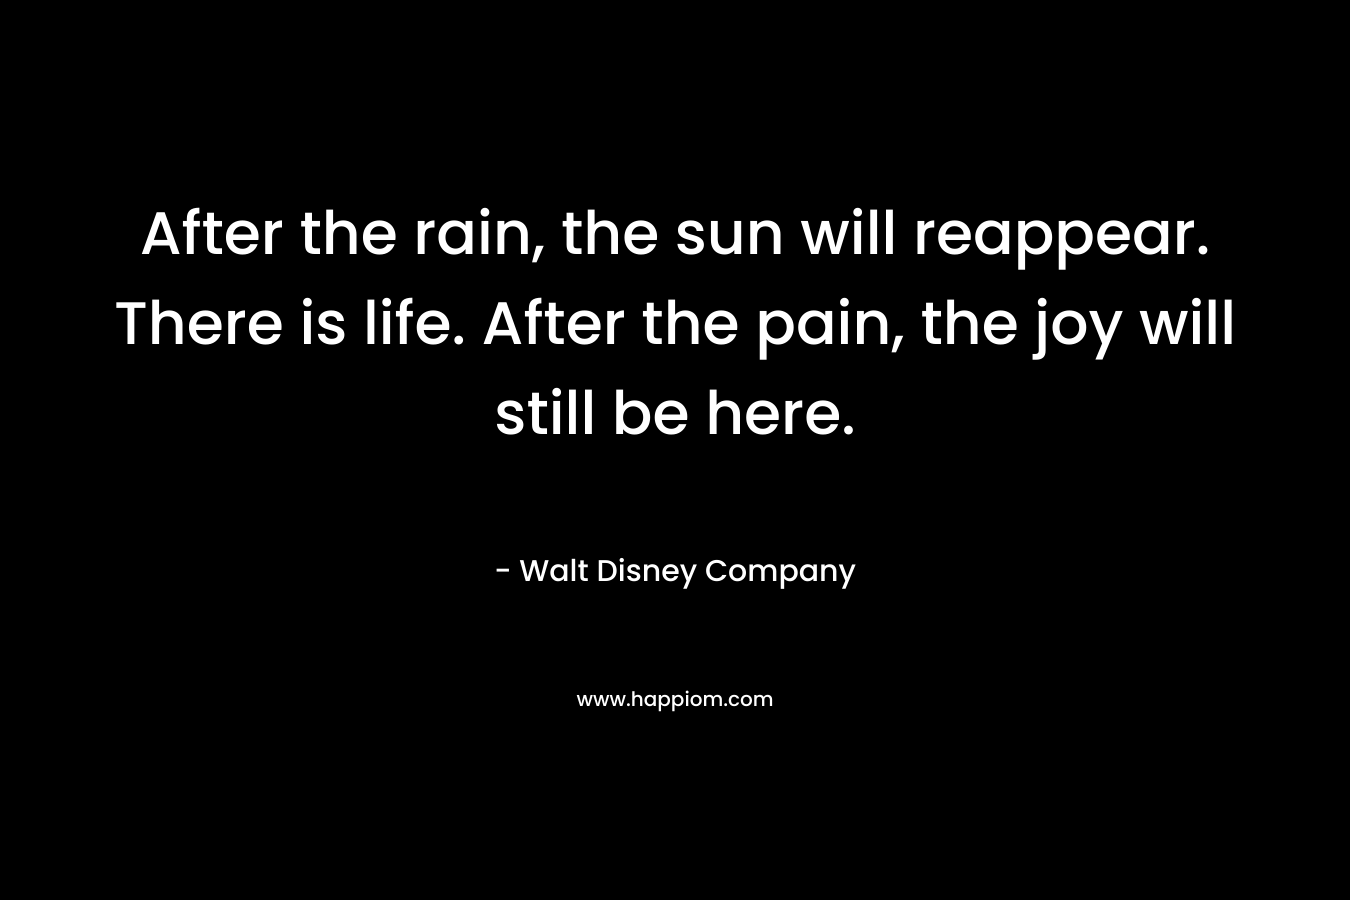 After the rain, the sun will reappear. There is life. After the pain, the joy will still be here. – Walt Disney Company